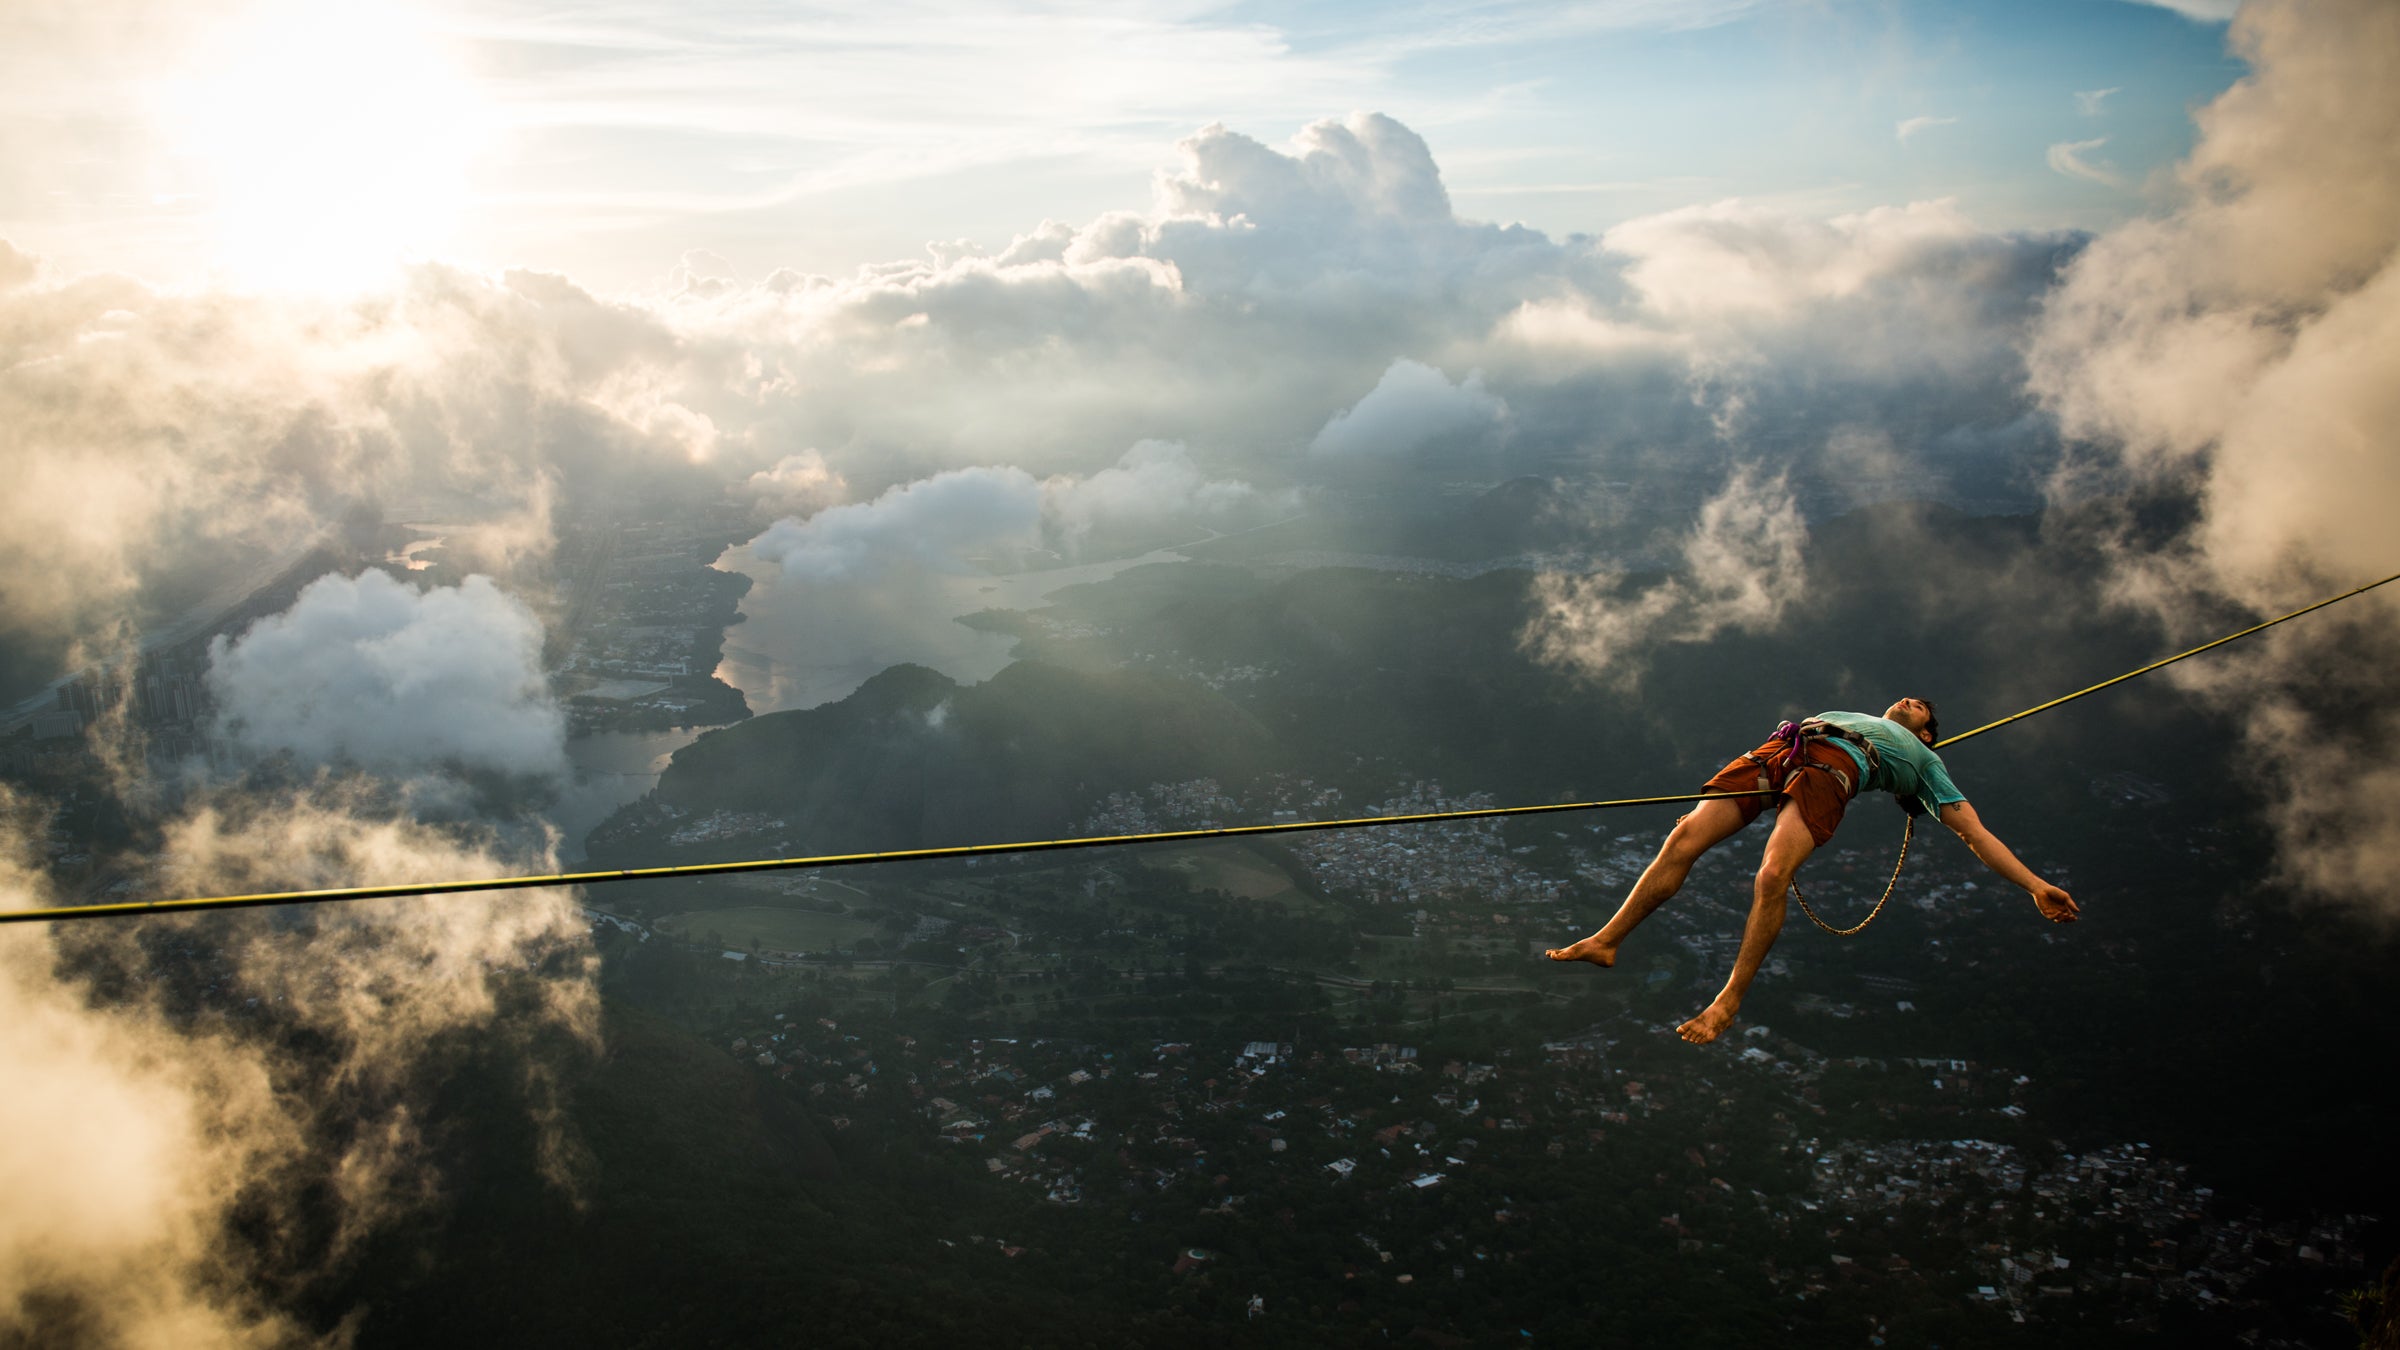 Extreme Sports: Slackline over Rio  Extreme Sports and Healthy Lifestyle